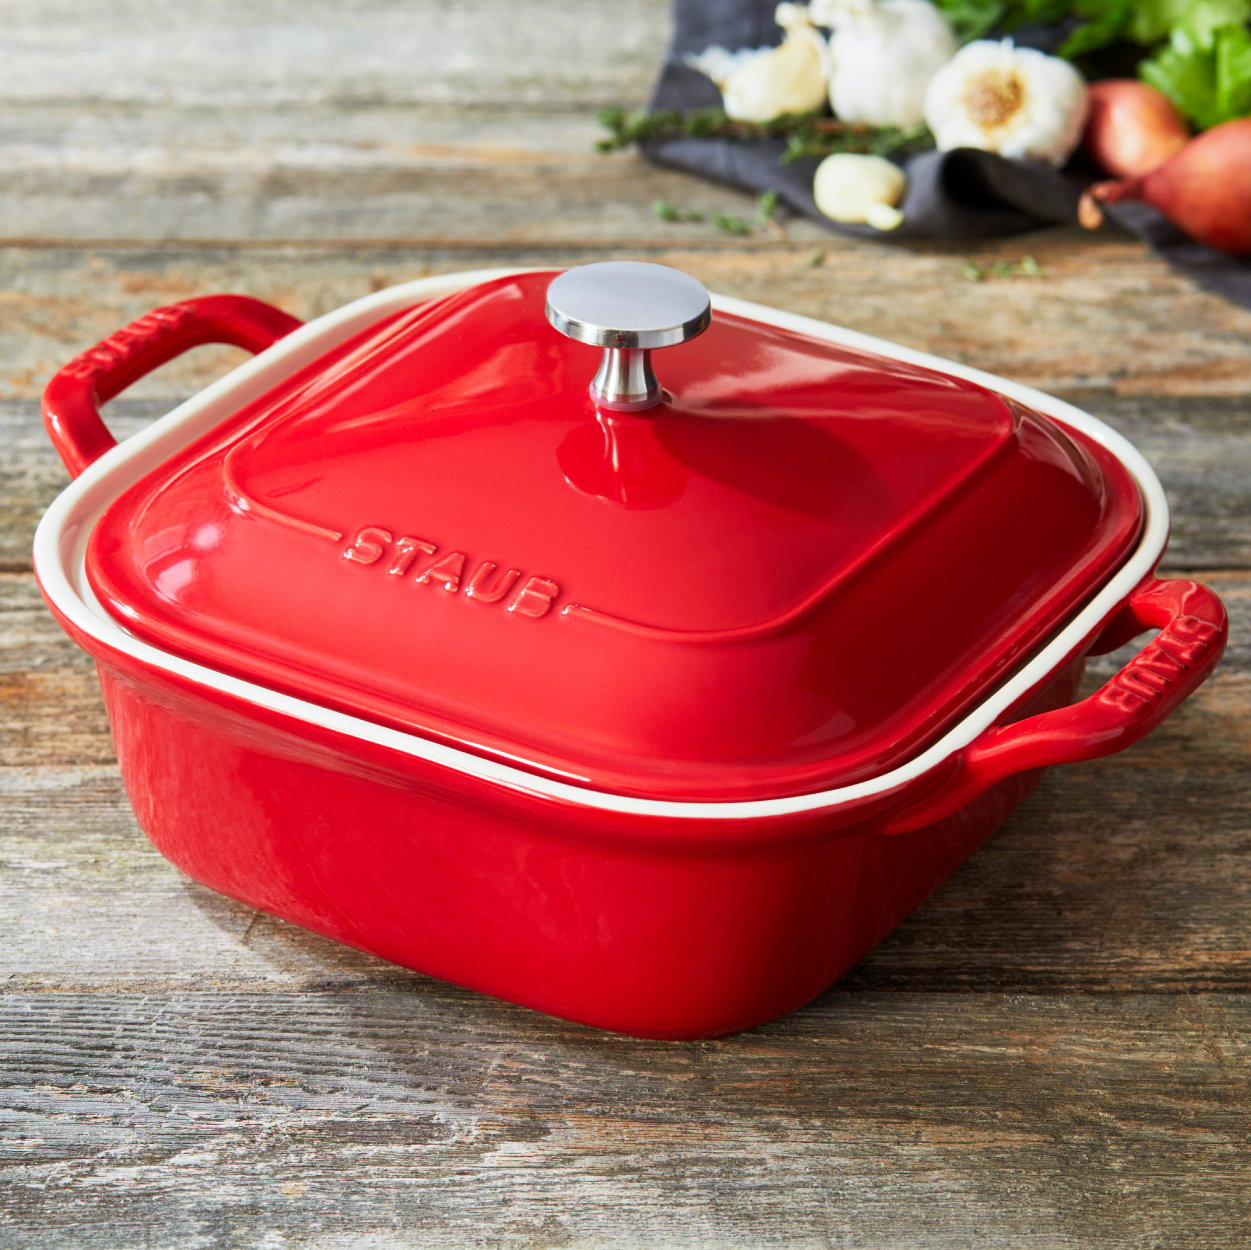 https://www.zwilling.com/on/demandware.static/-/Sites-zwilling-us-Library/default/dw1250a879/images/product-content/masonry-content/staub/ceramics/ovendish/PDP_Masonry_Ceramics_V2_600-600_ST_Ceramics_2.jpg